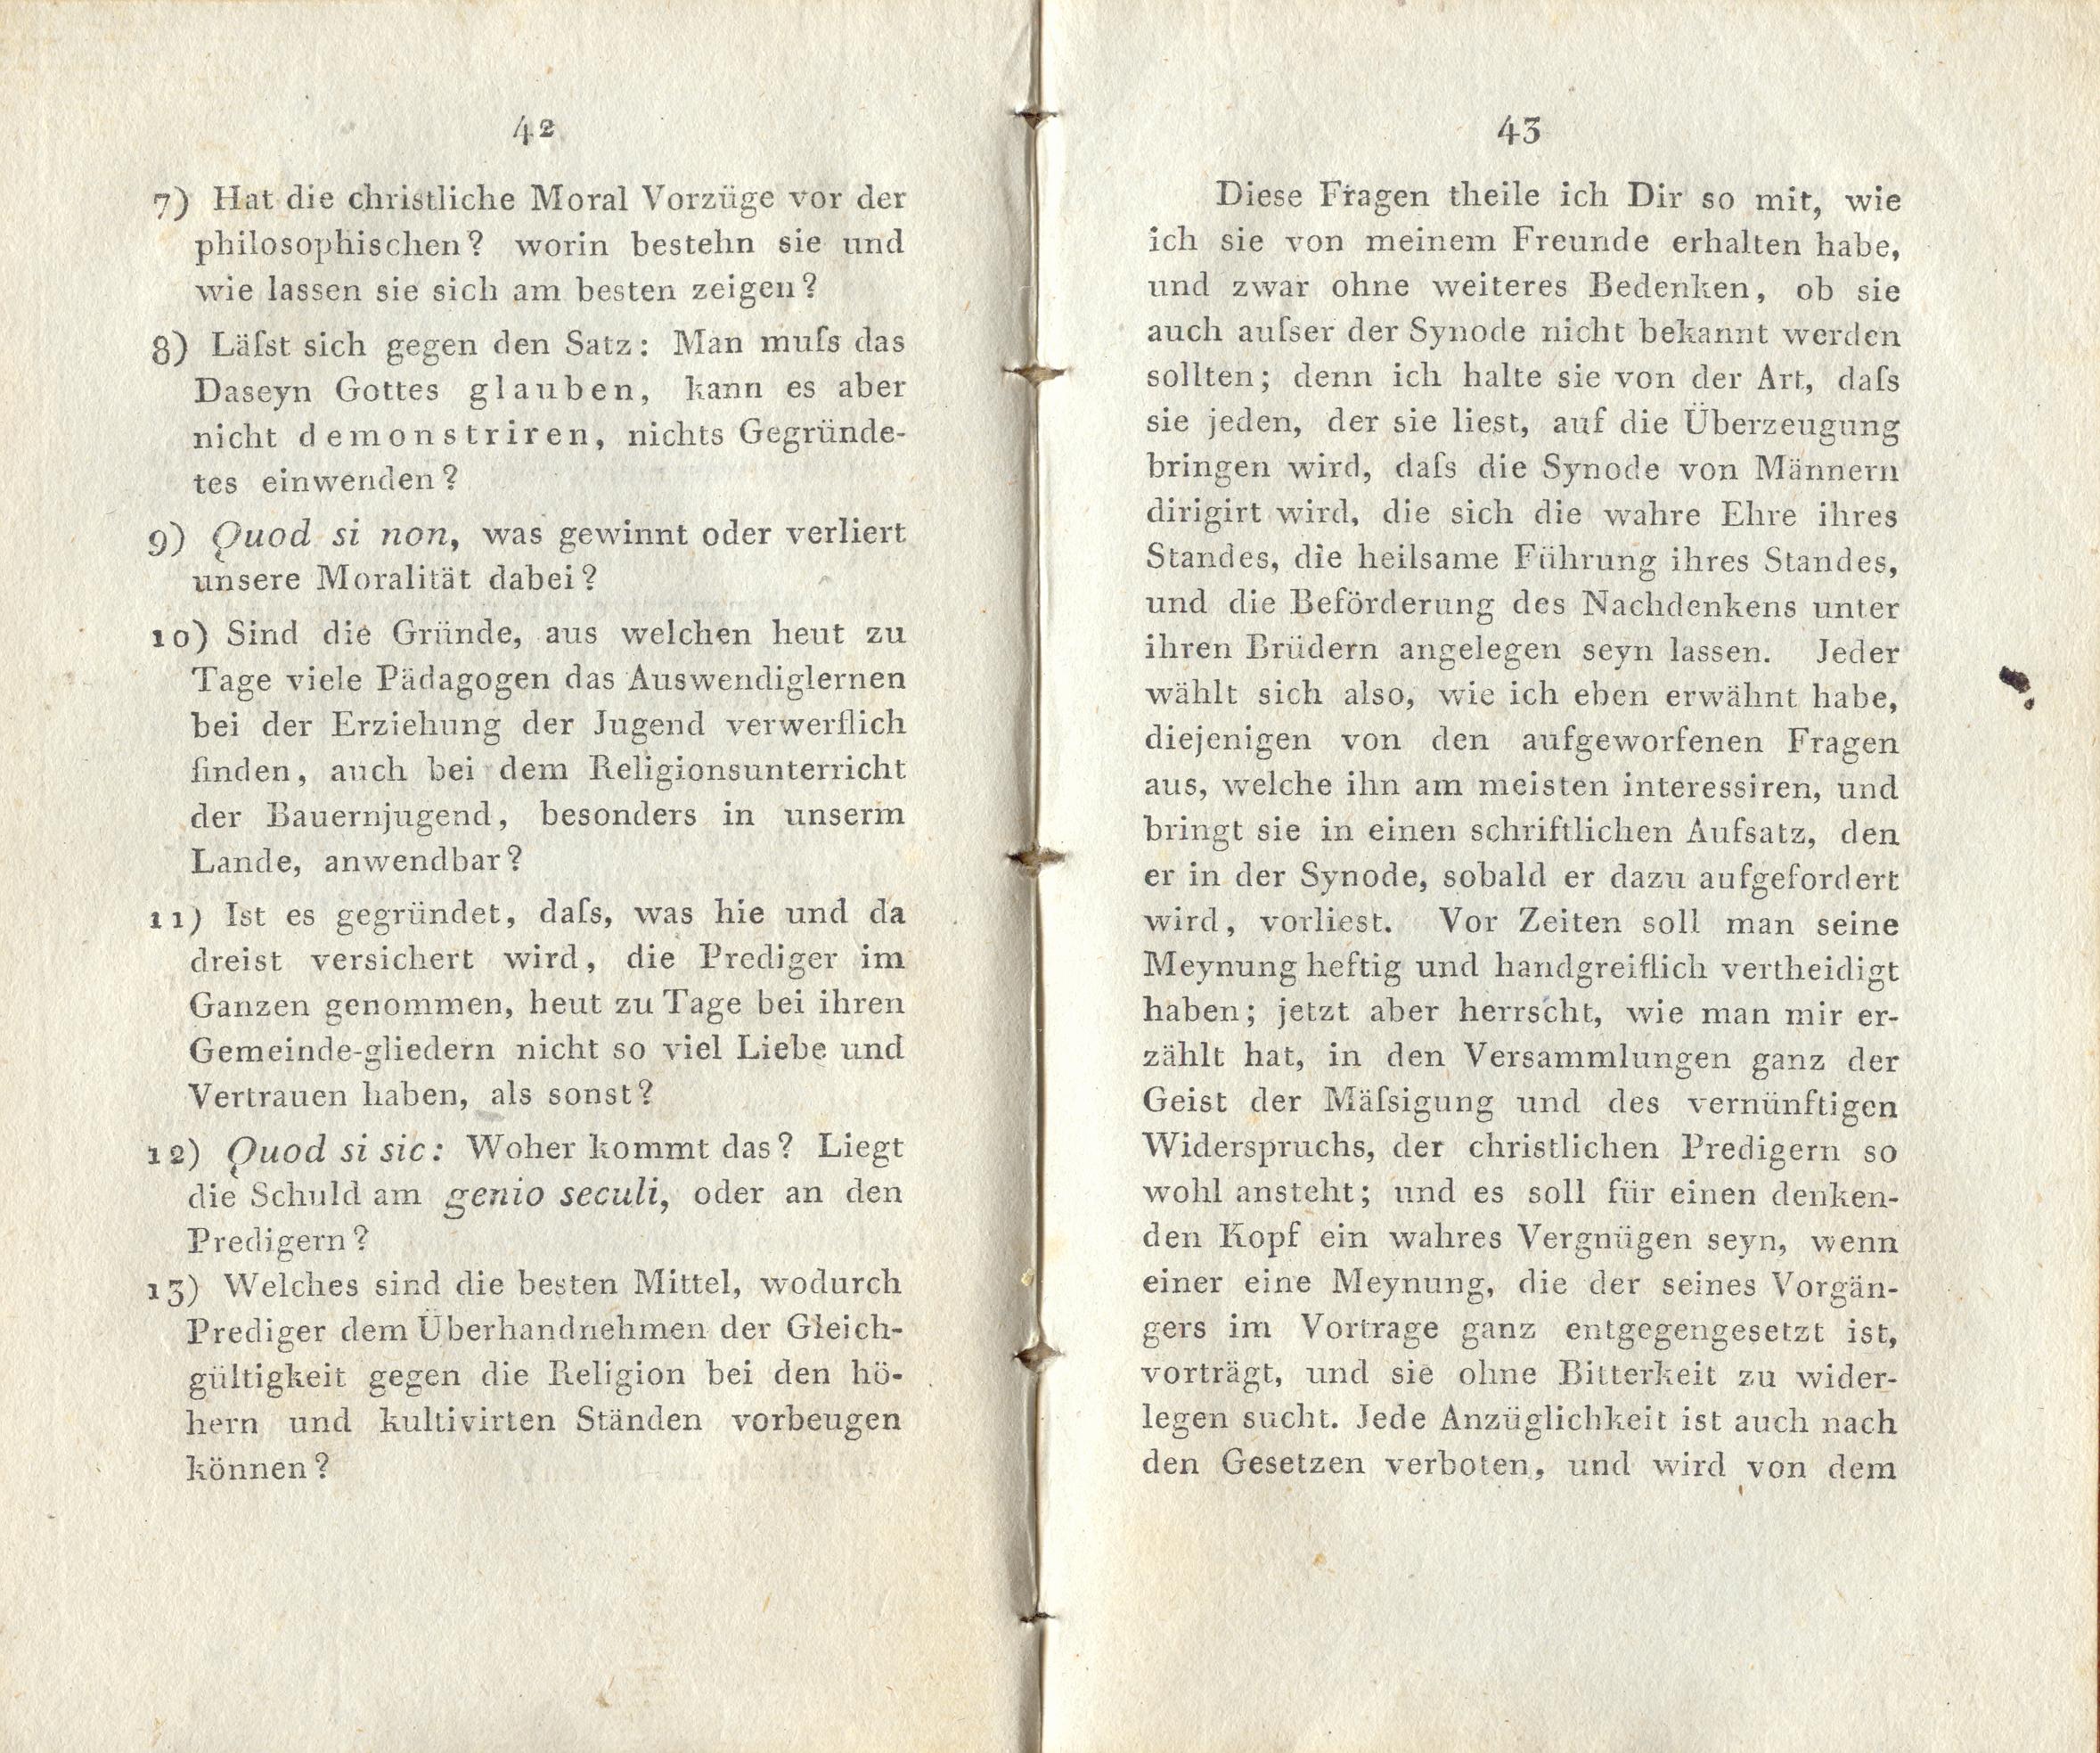 Briefe über Reval (1800) | 22. (42-43) Main body of text